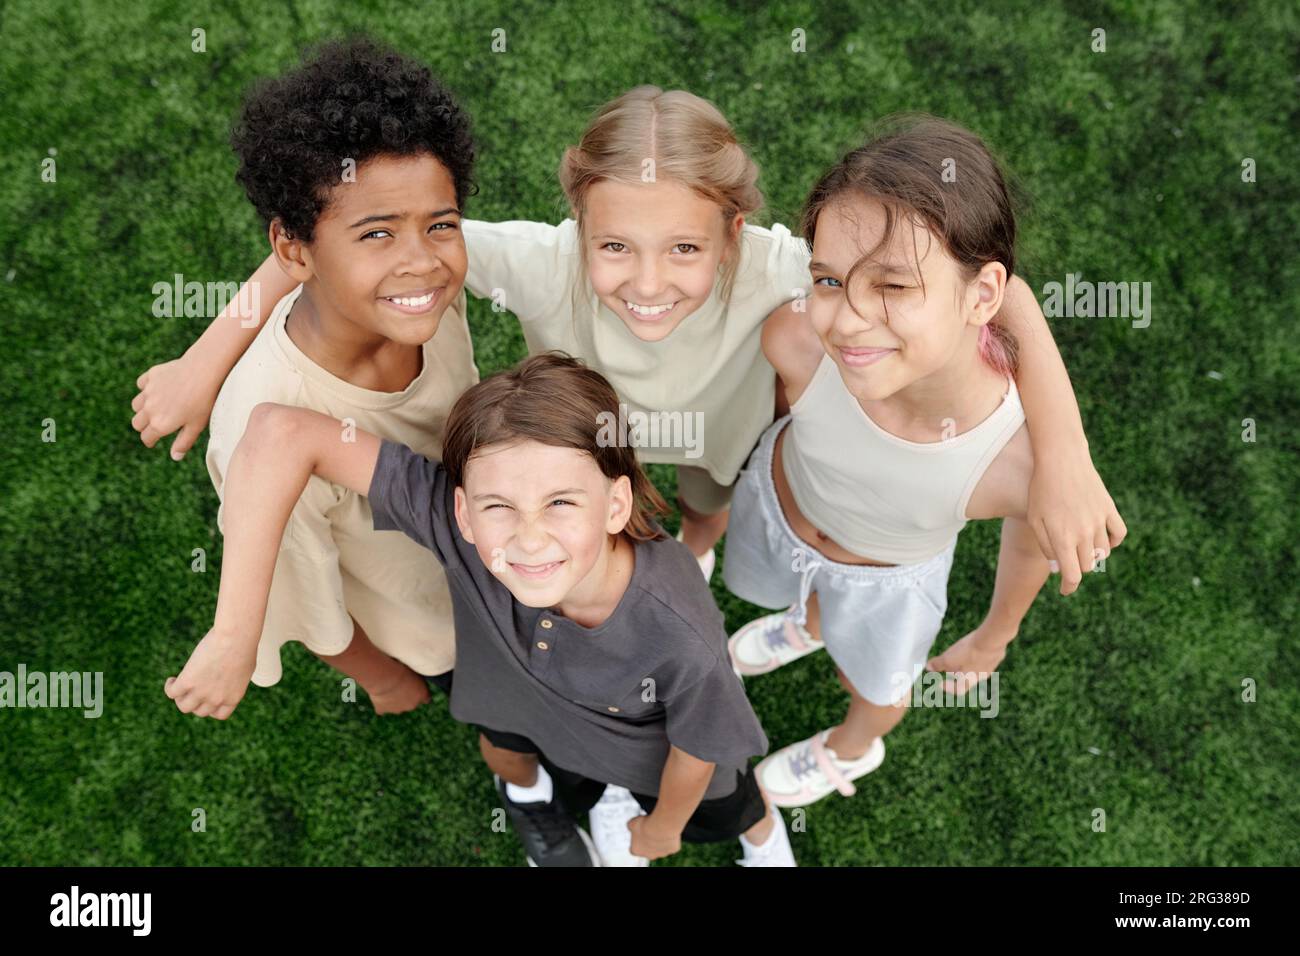 Above angle of several happy intercultural children in activewear standing against green lawn or football field and looking at camera with smiles Stock Photo